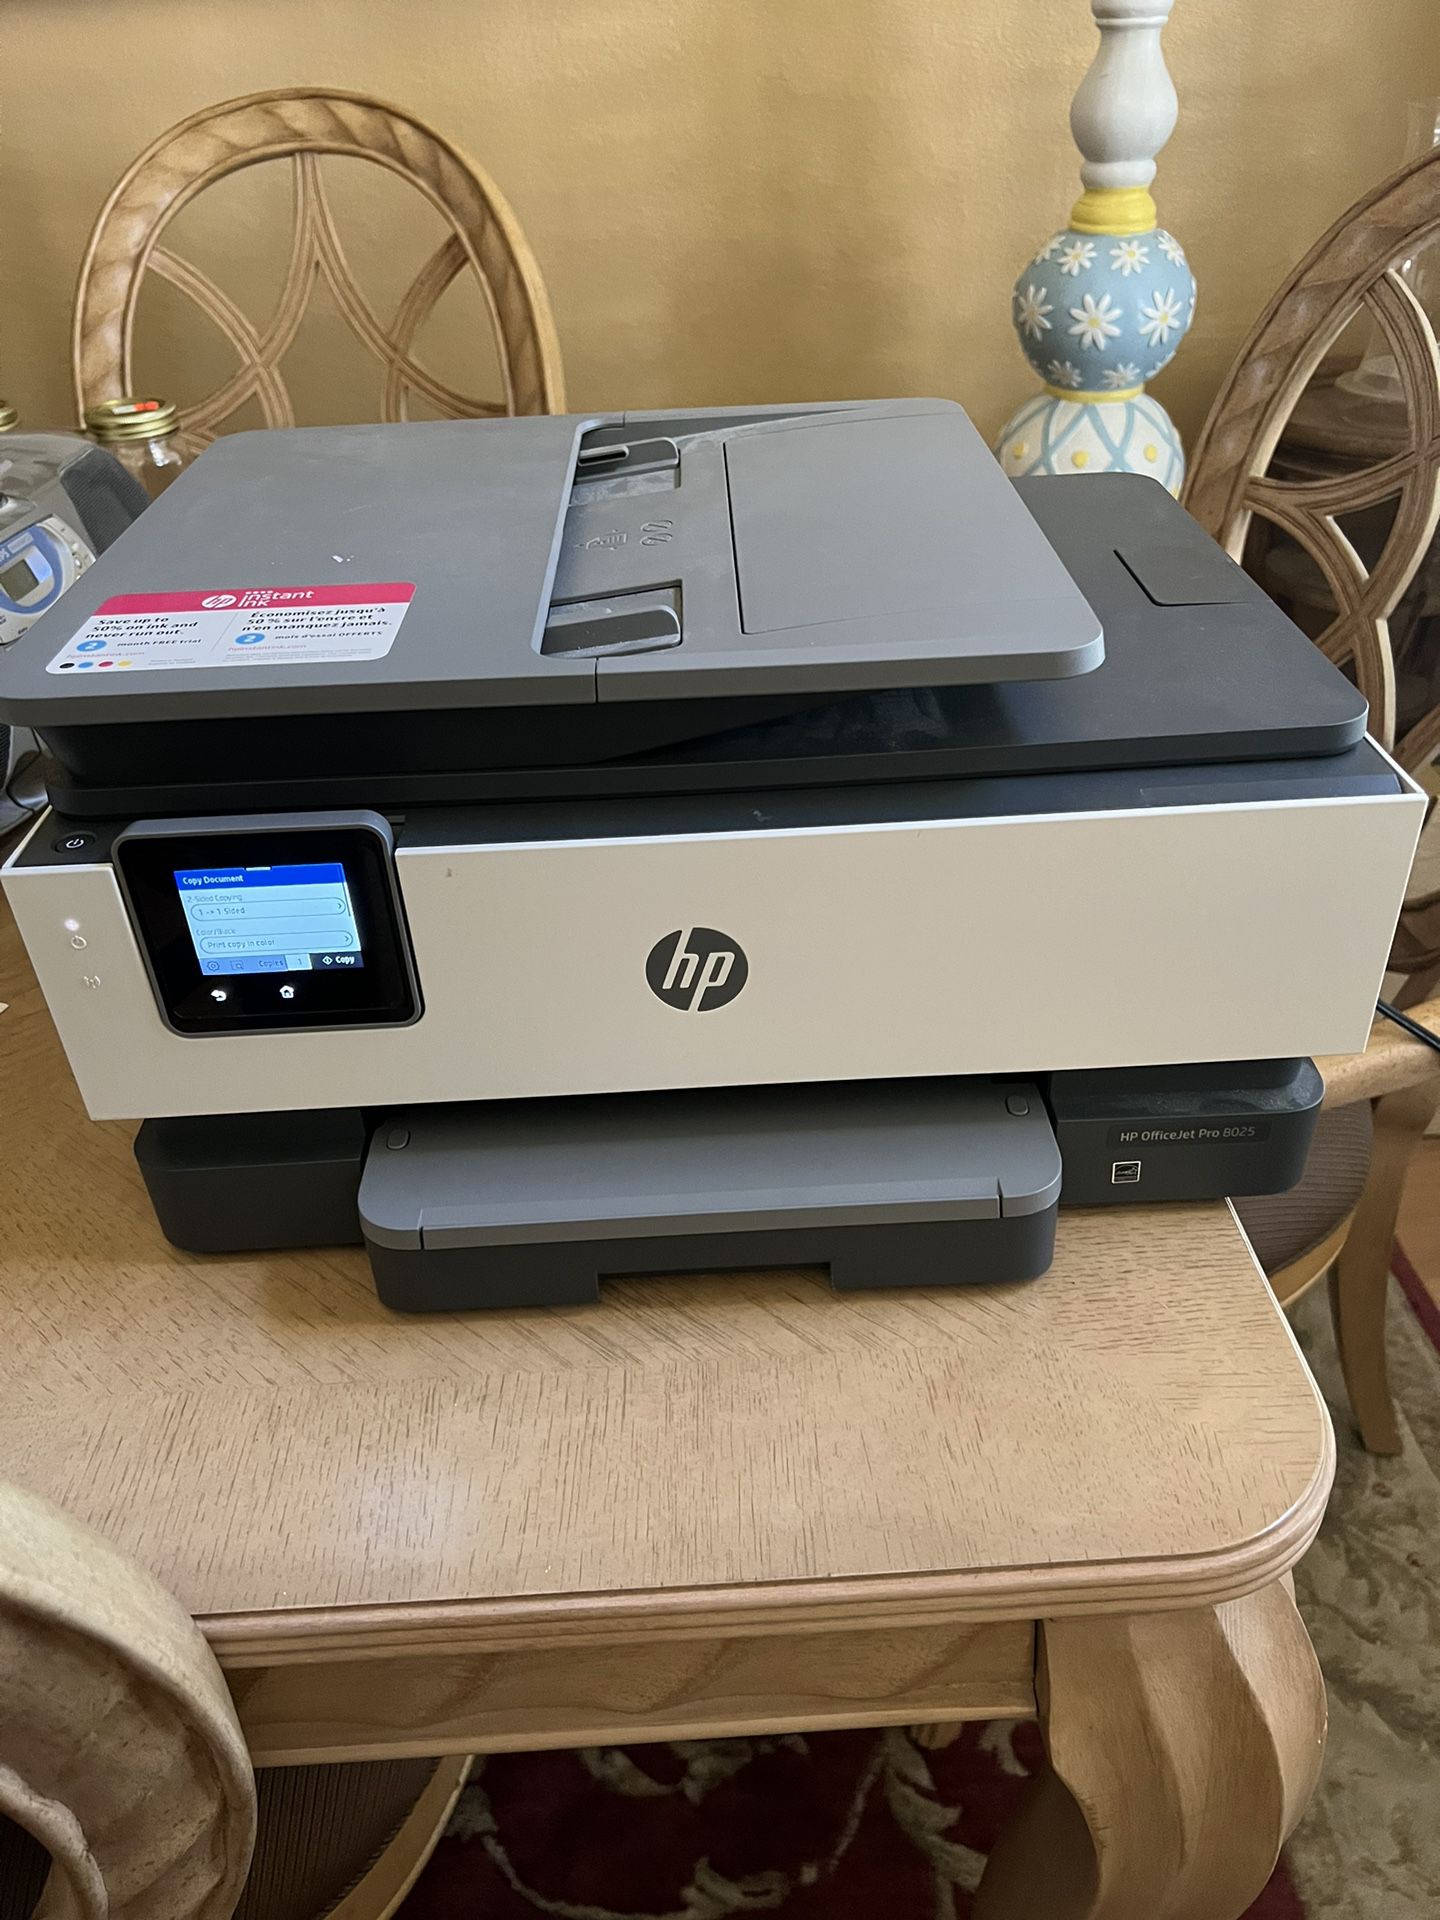 HP Office Jet 8025 Wireless All In One Printer for Sale in Chandler, AZ - OfferUp